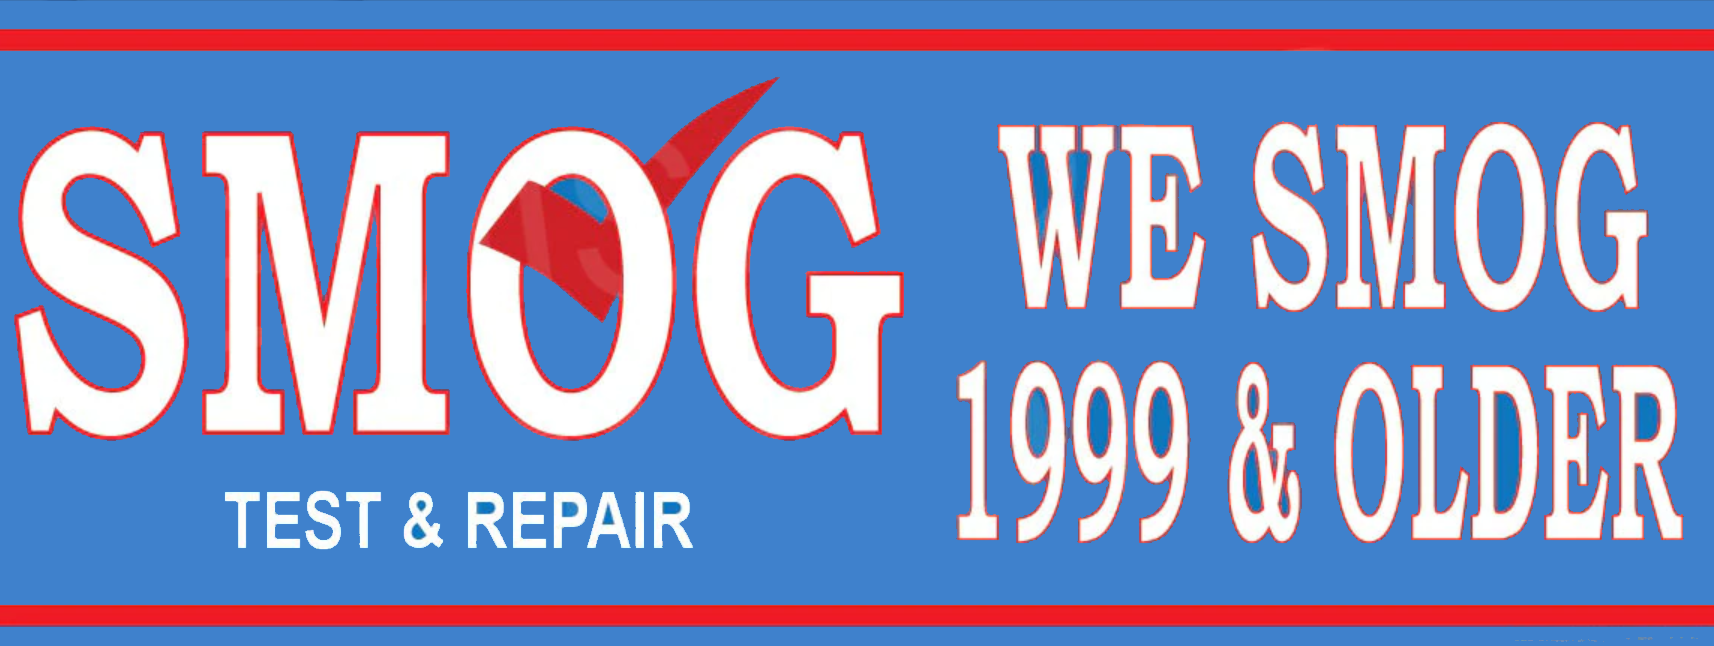 Smog Banner, Smog Check Banner, Test and Repair Banner